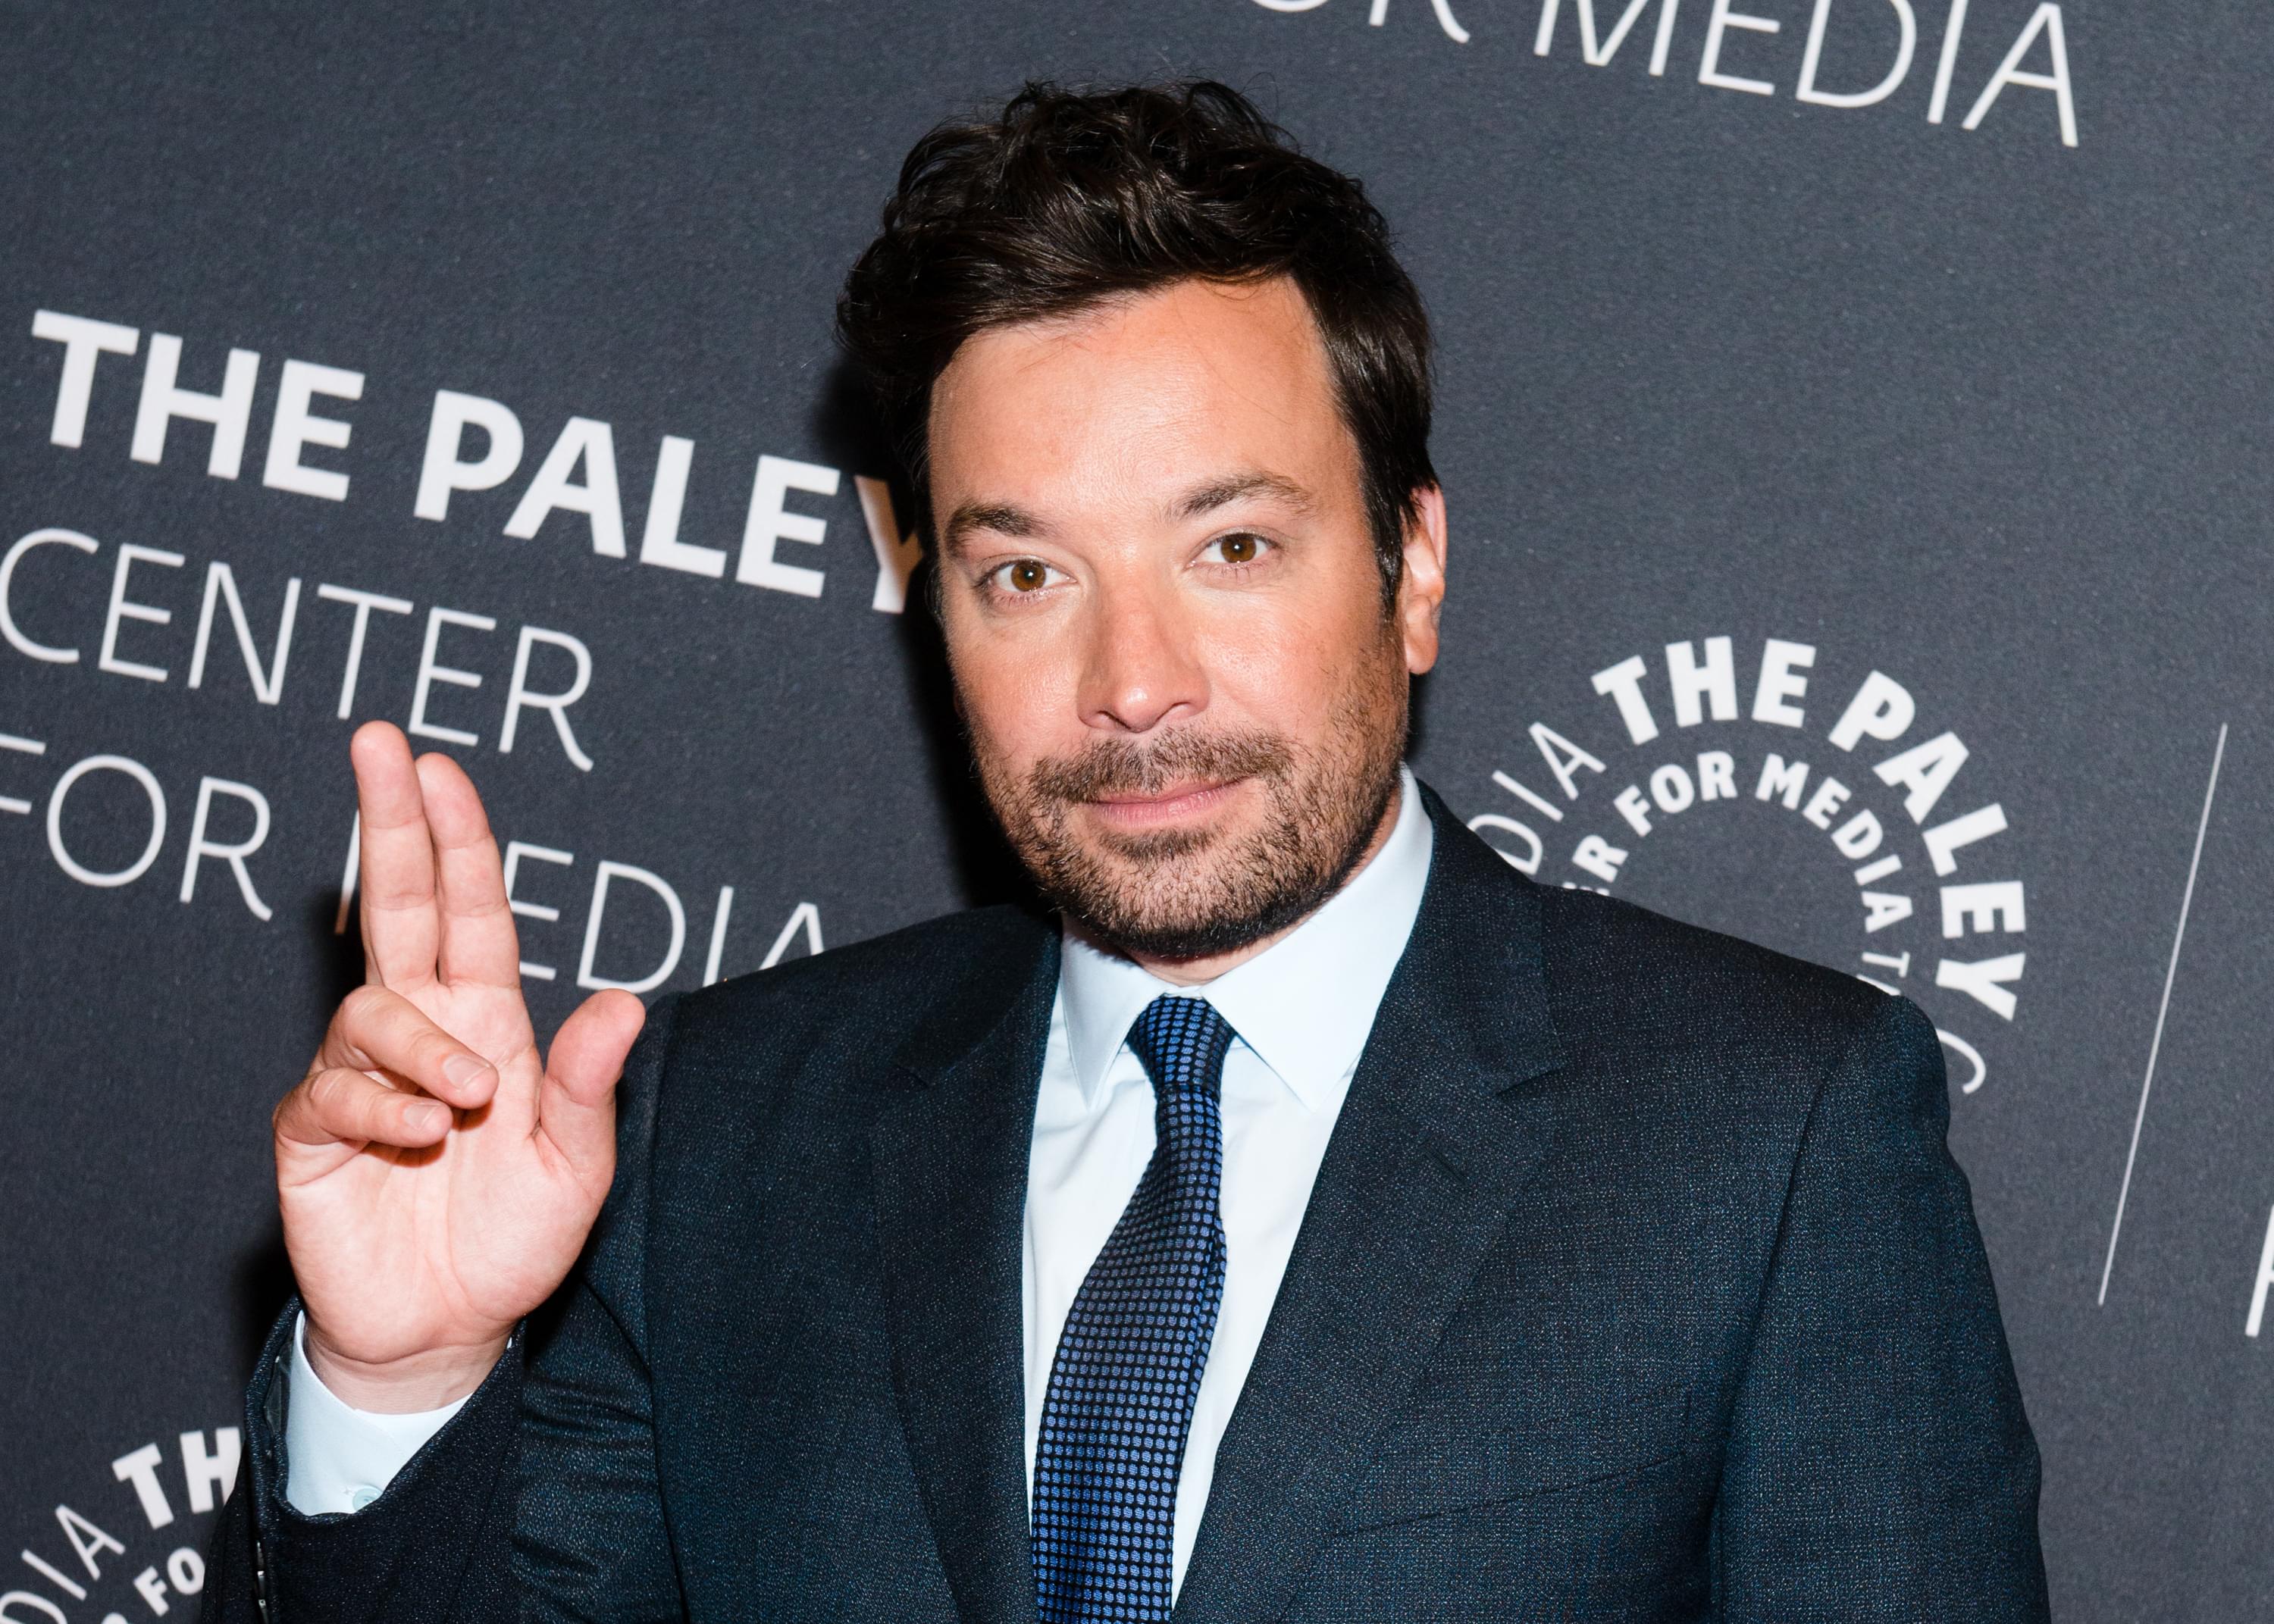 Jimmy Fallon Gives A Powerful Message While Addressing The Charlottesville Events [WATCH]